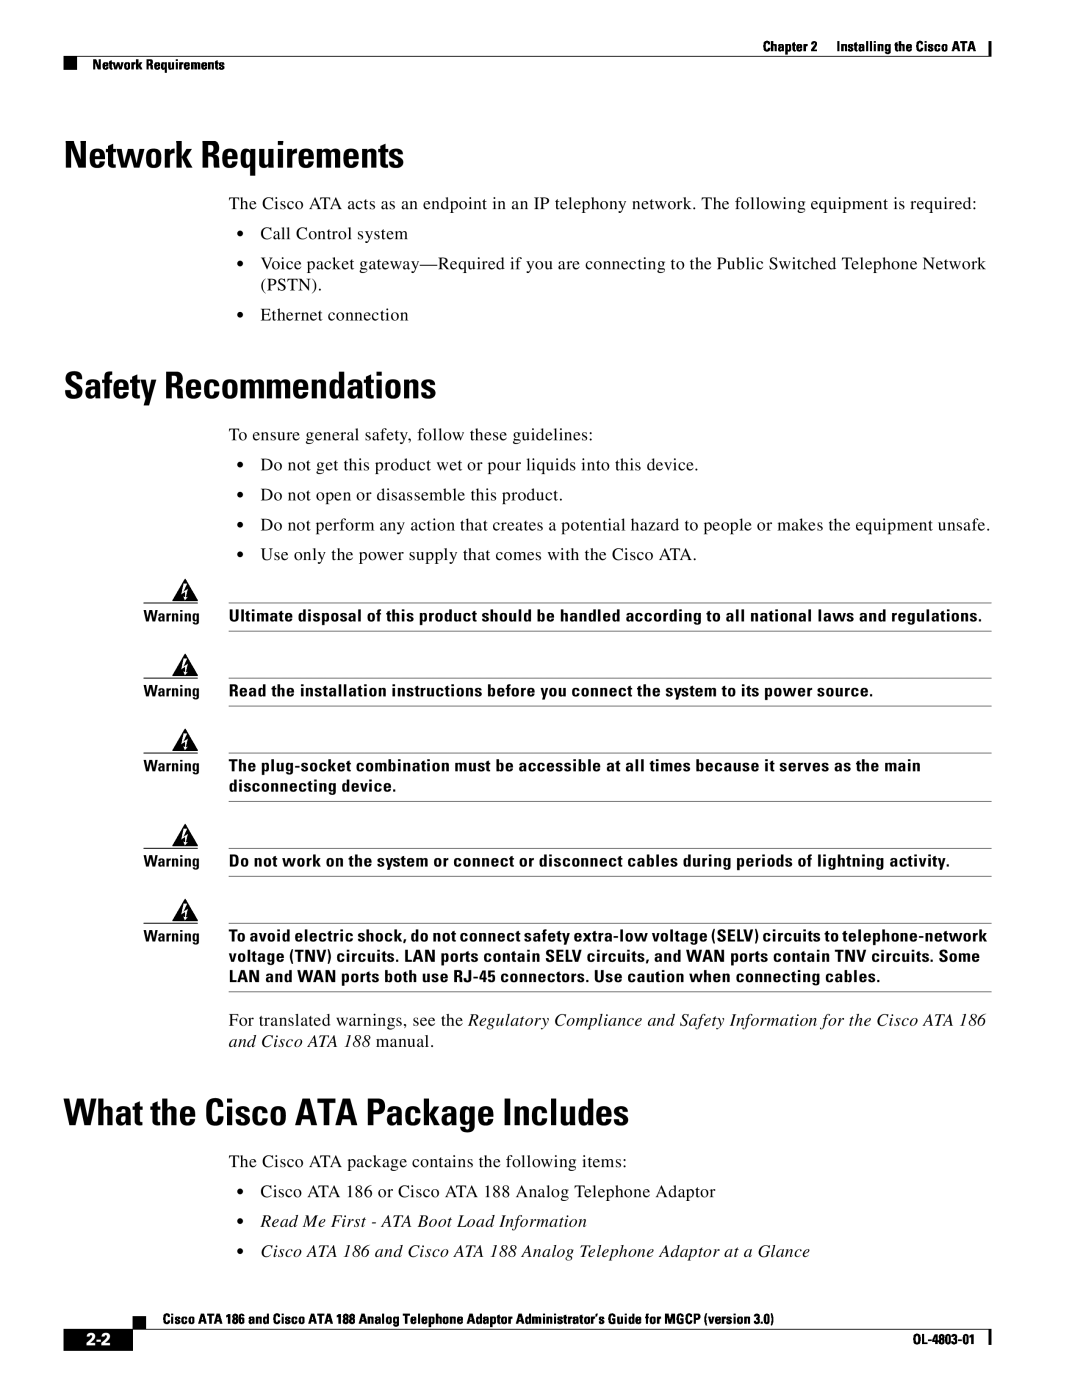 Cisco Systems ATA 186, ATA 188 manual Network Requirements, Safety Recommendations, What the Cisco ATA Package Includes 